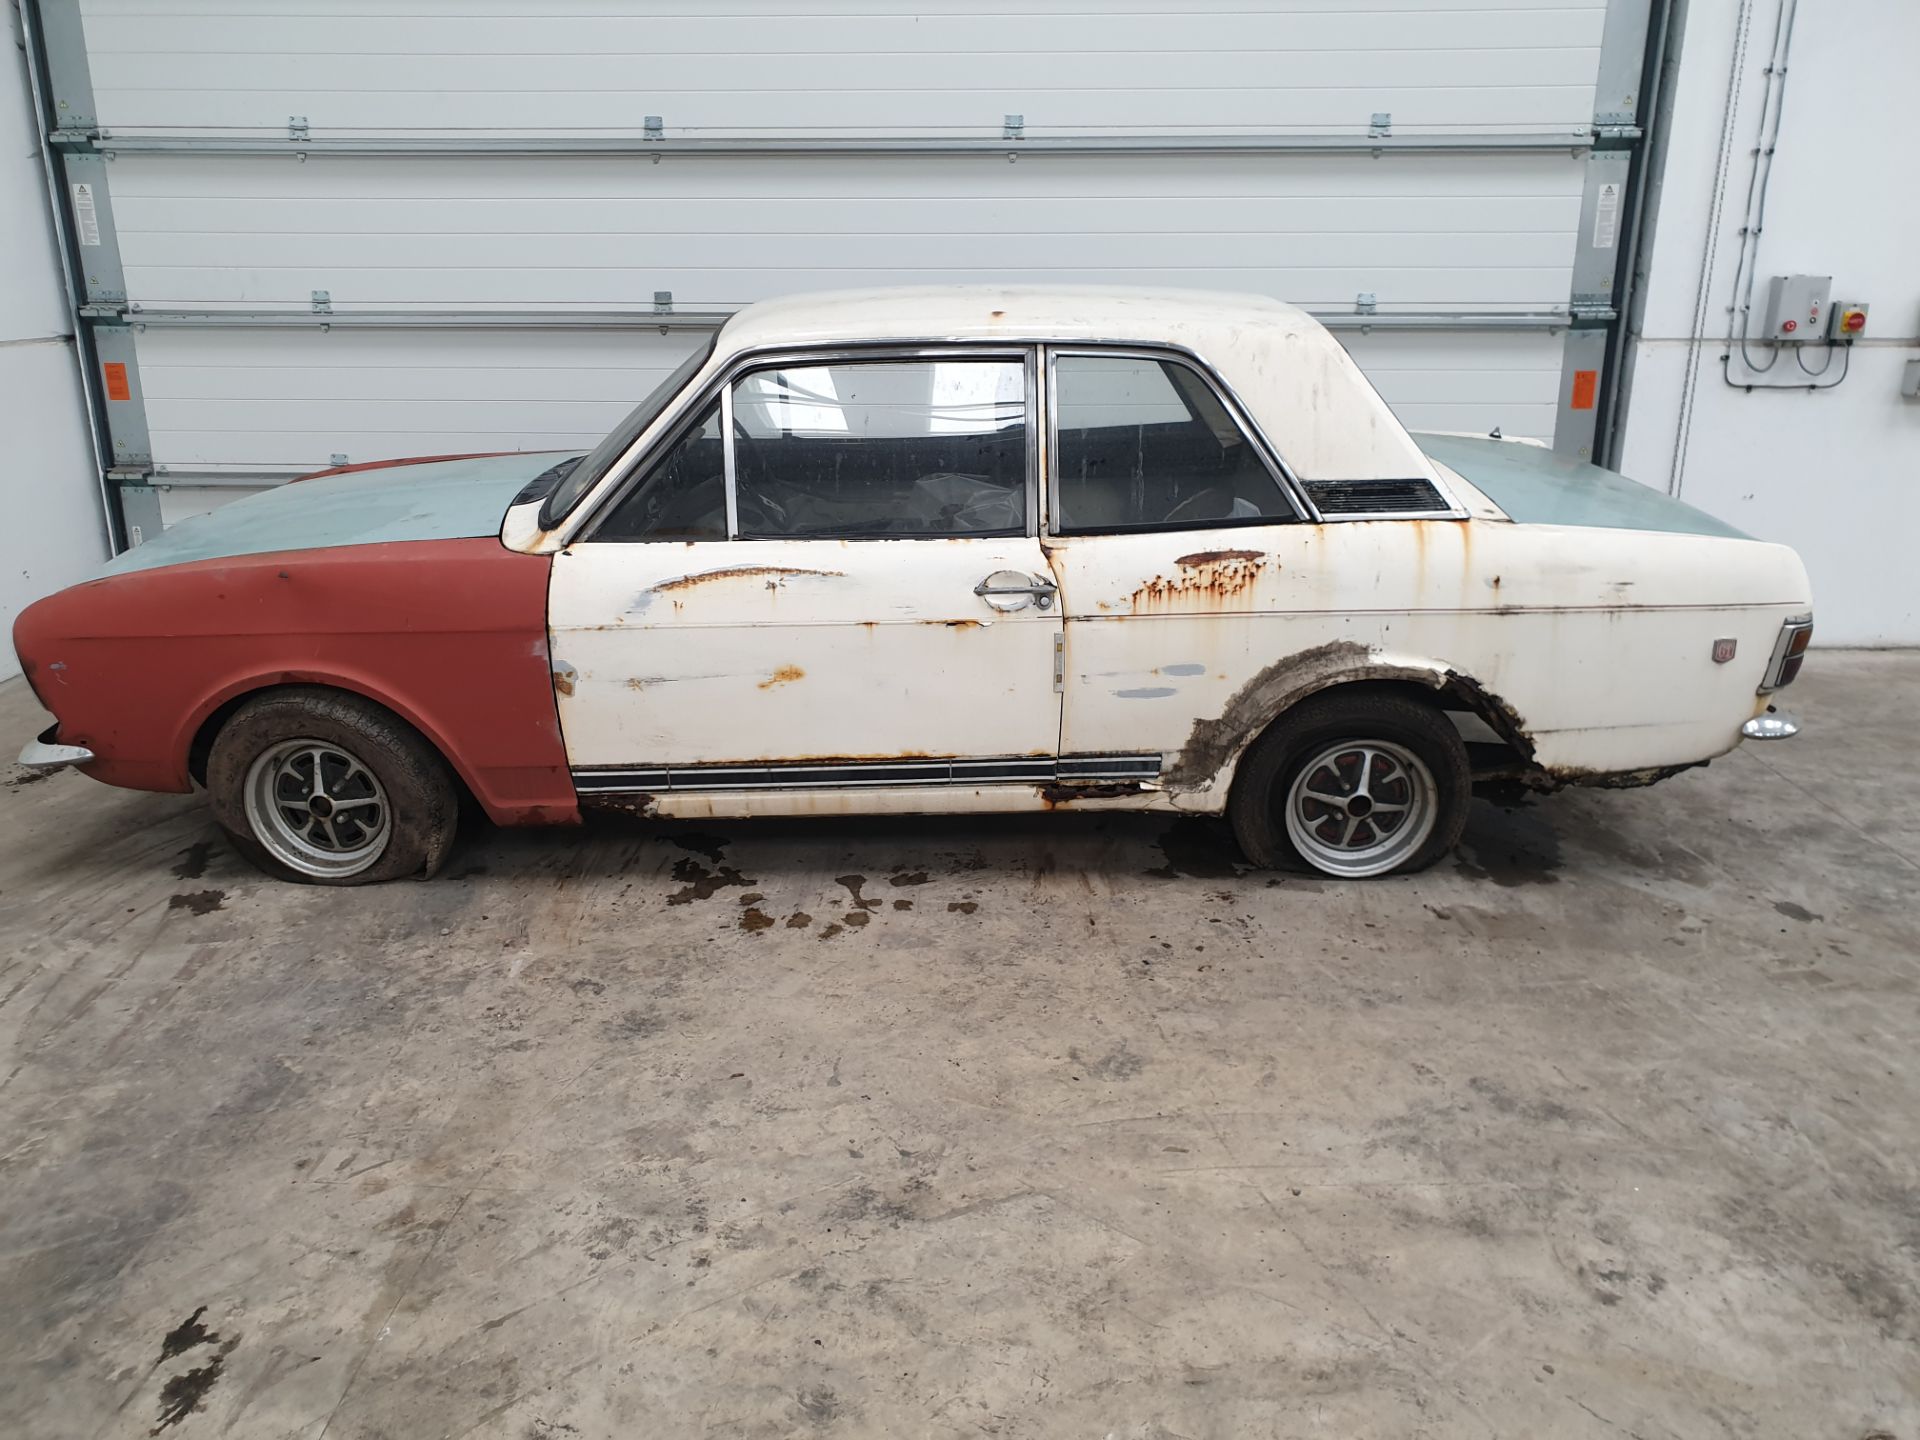 Ford Cortina 1600 GT 2 dr - Image 6 of 11